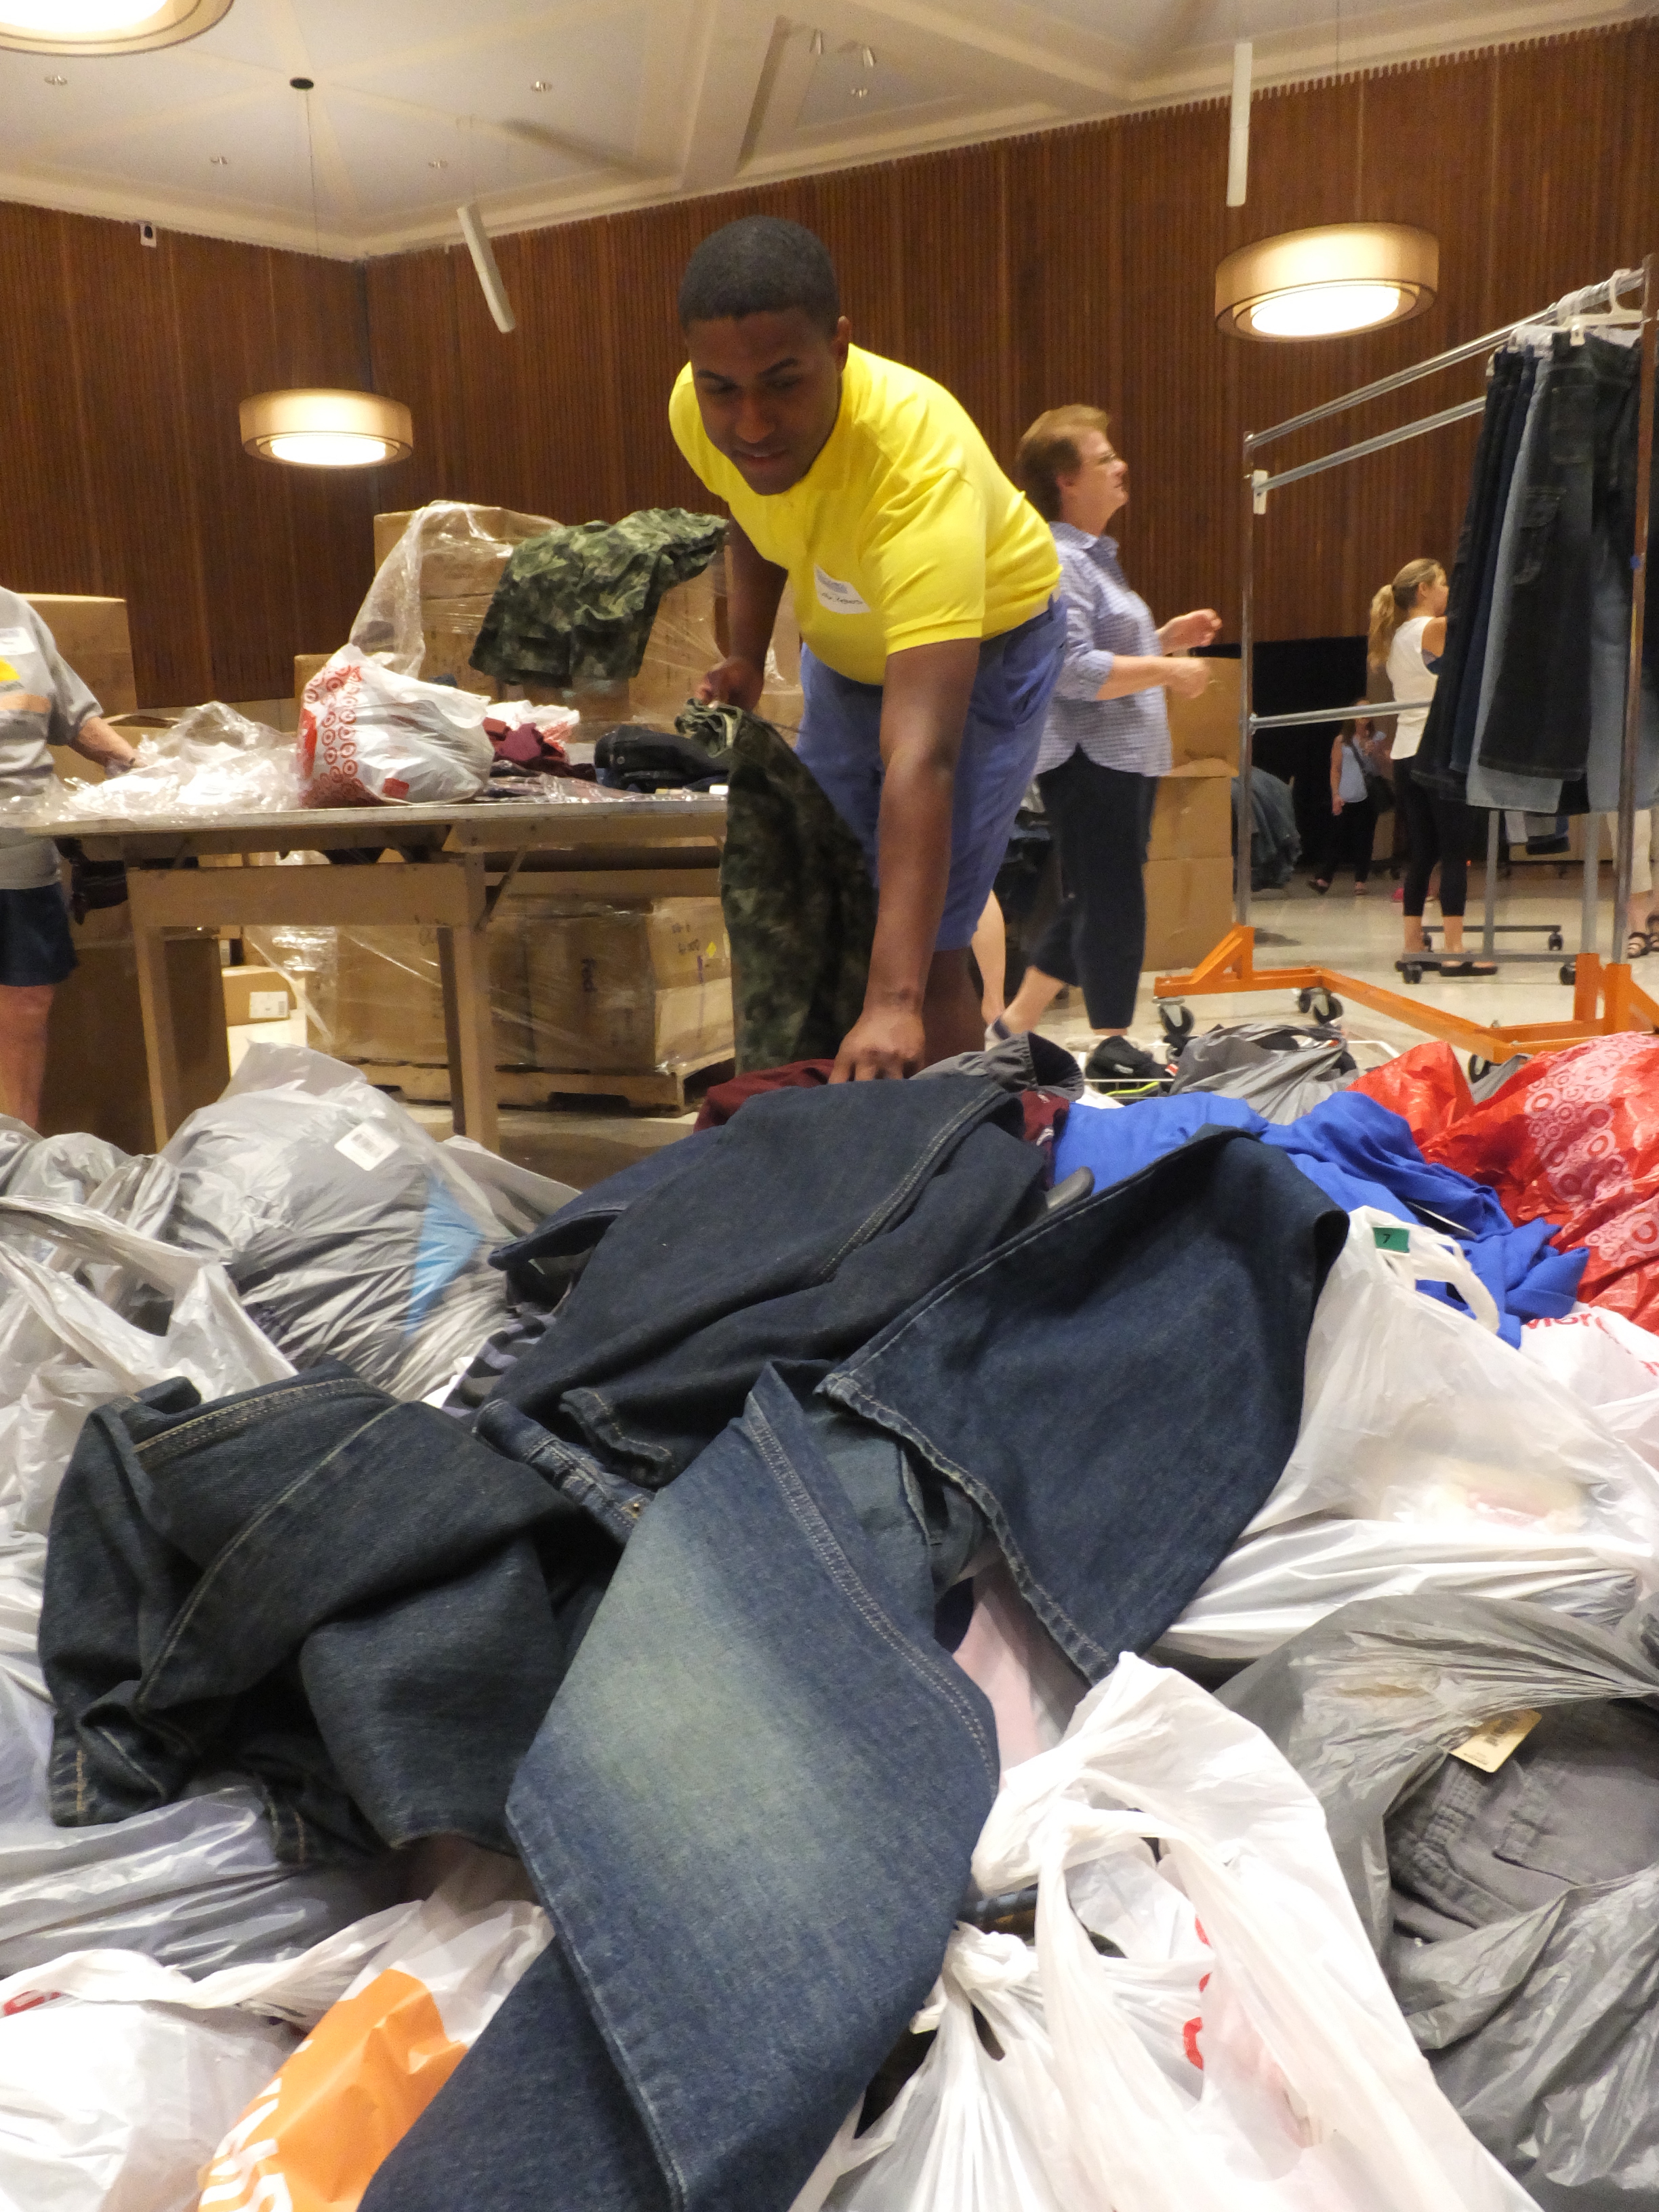 Unions pitch in to help National Council of Jewish Women distribute school  supplies, clothing to 1,300 kids in need - The Labor Tribune